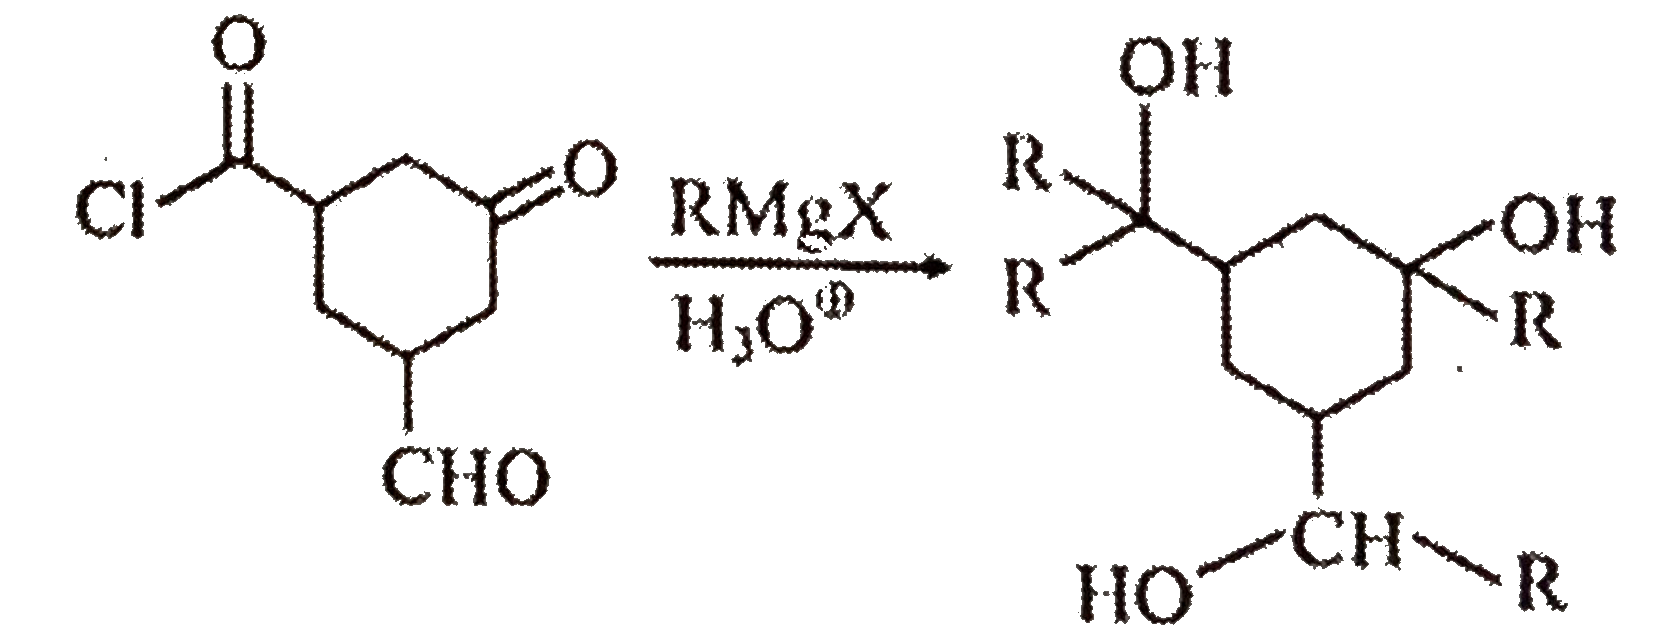 How many molecules of RMgX are consumed in the above given reaction ?